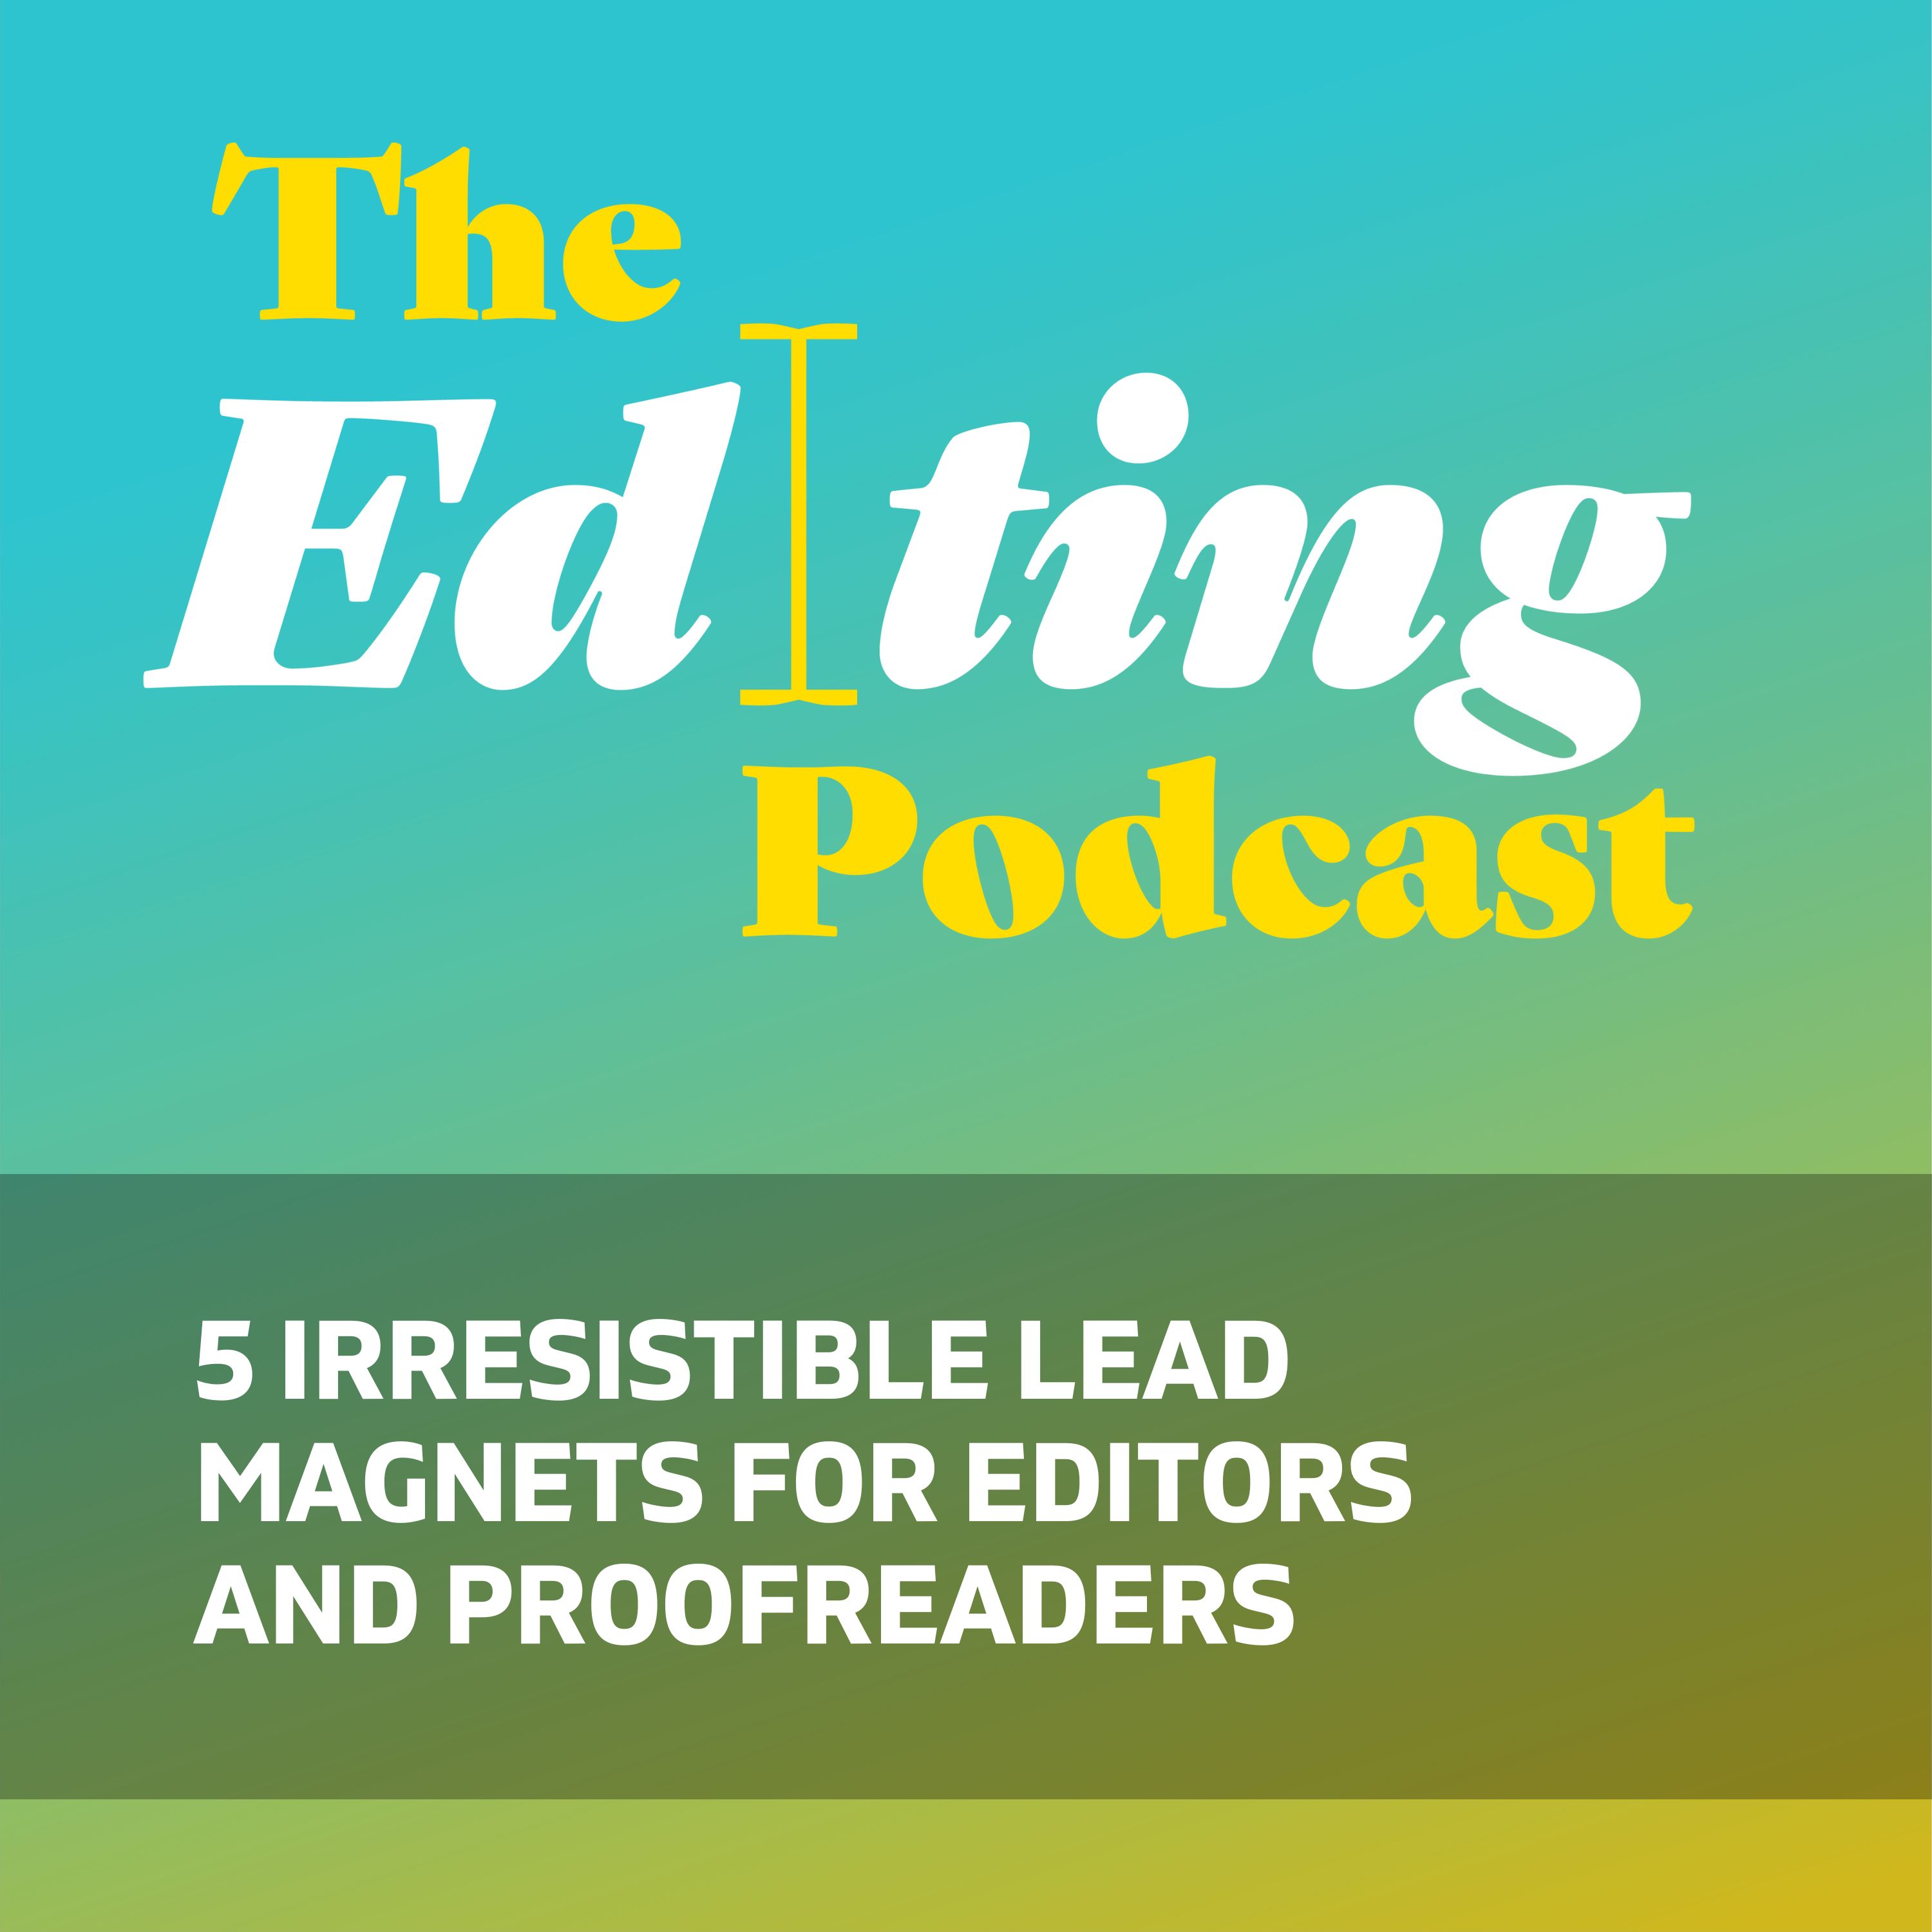 5 irresistible lead magnets for editors and proofreaders